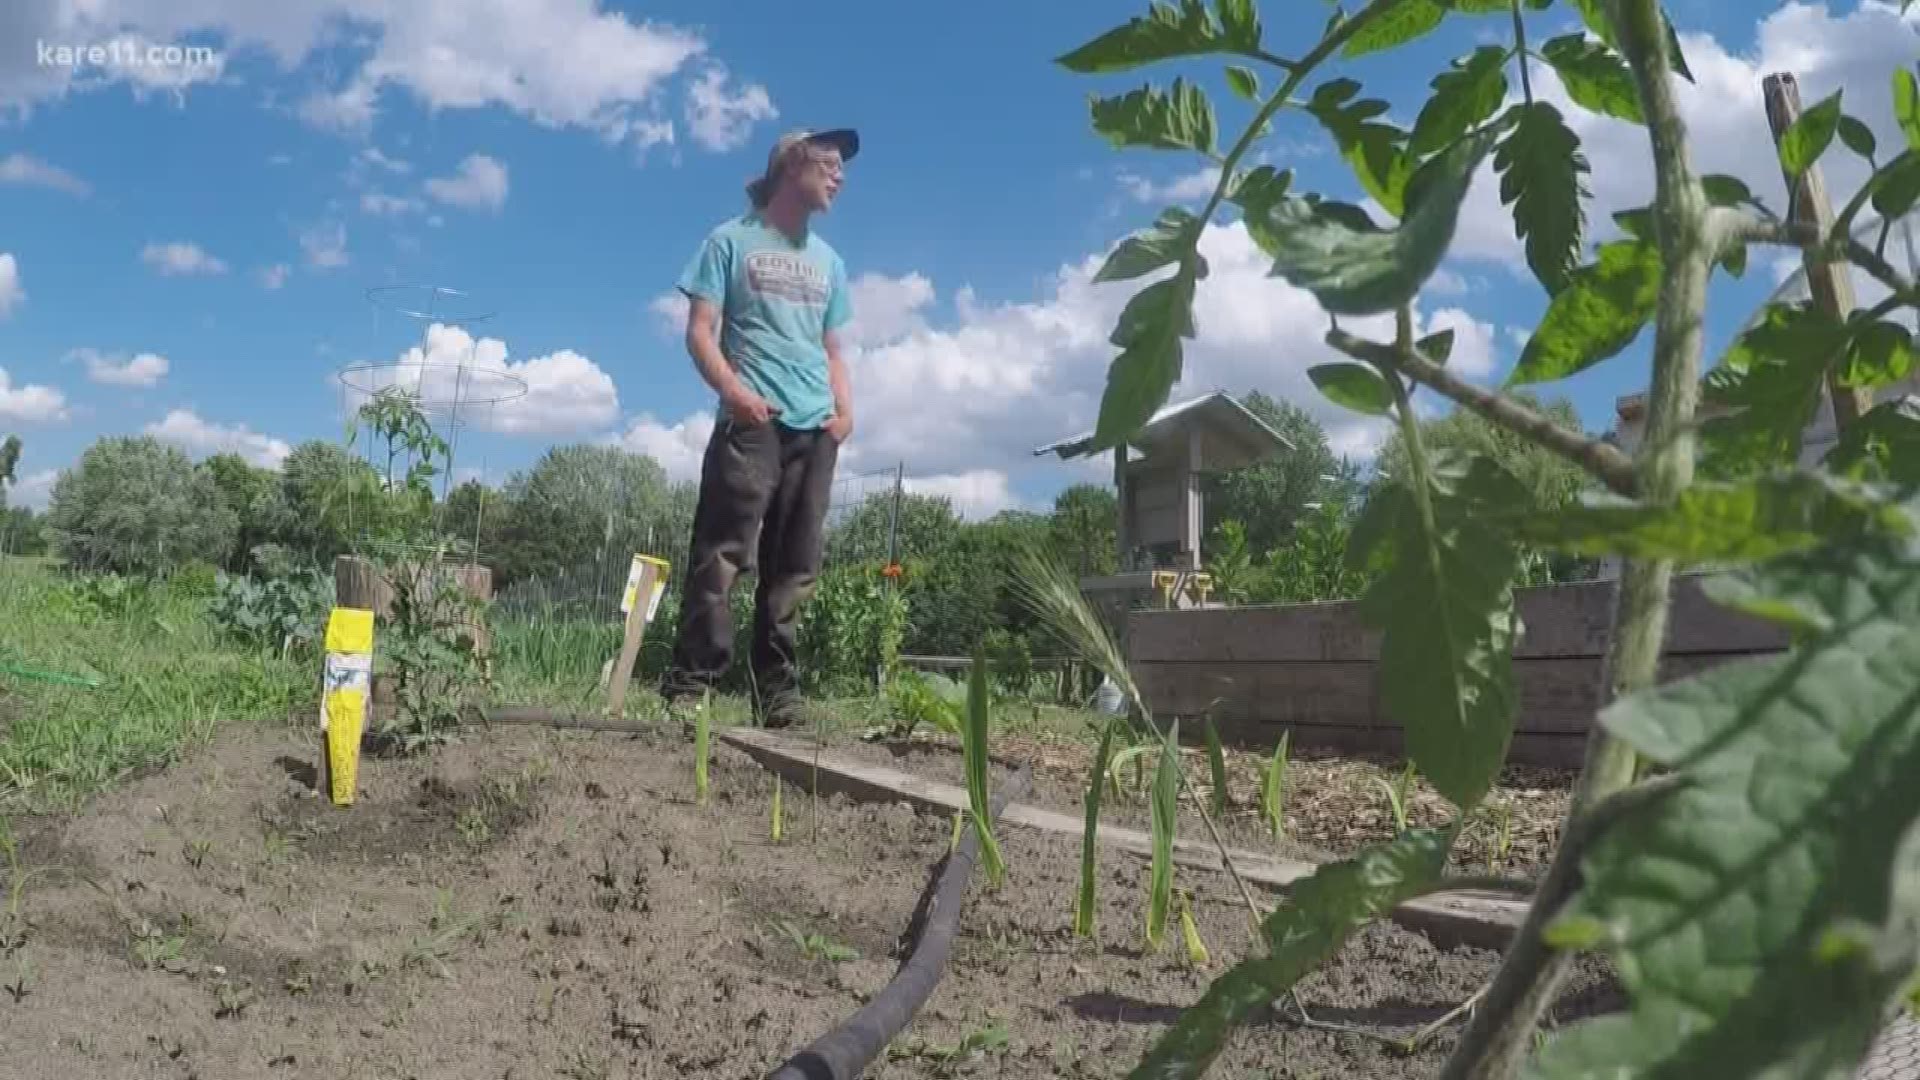 "It's heartbreaking for me, because of how much work I put into it, but also I knew the kids would really miss it as well," said garden farmer Ben DeVore.